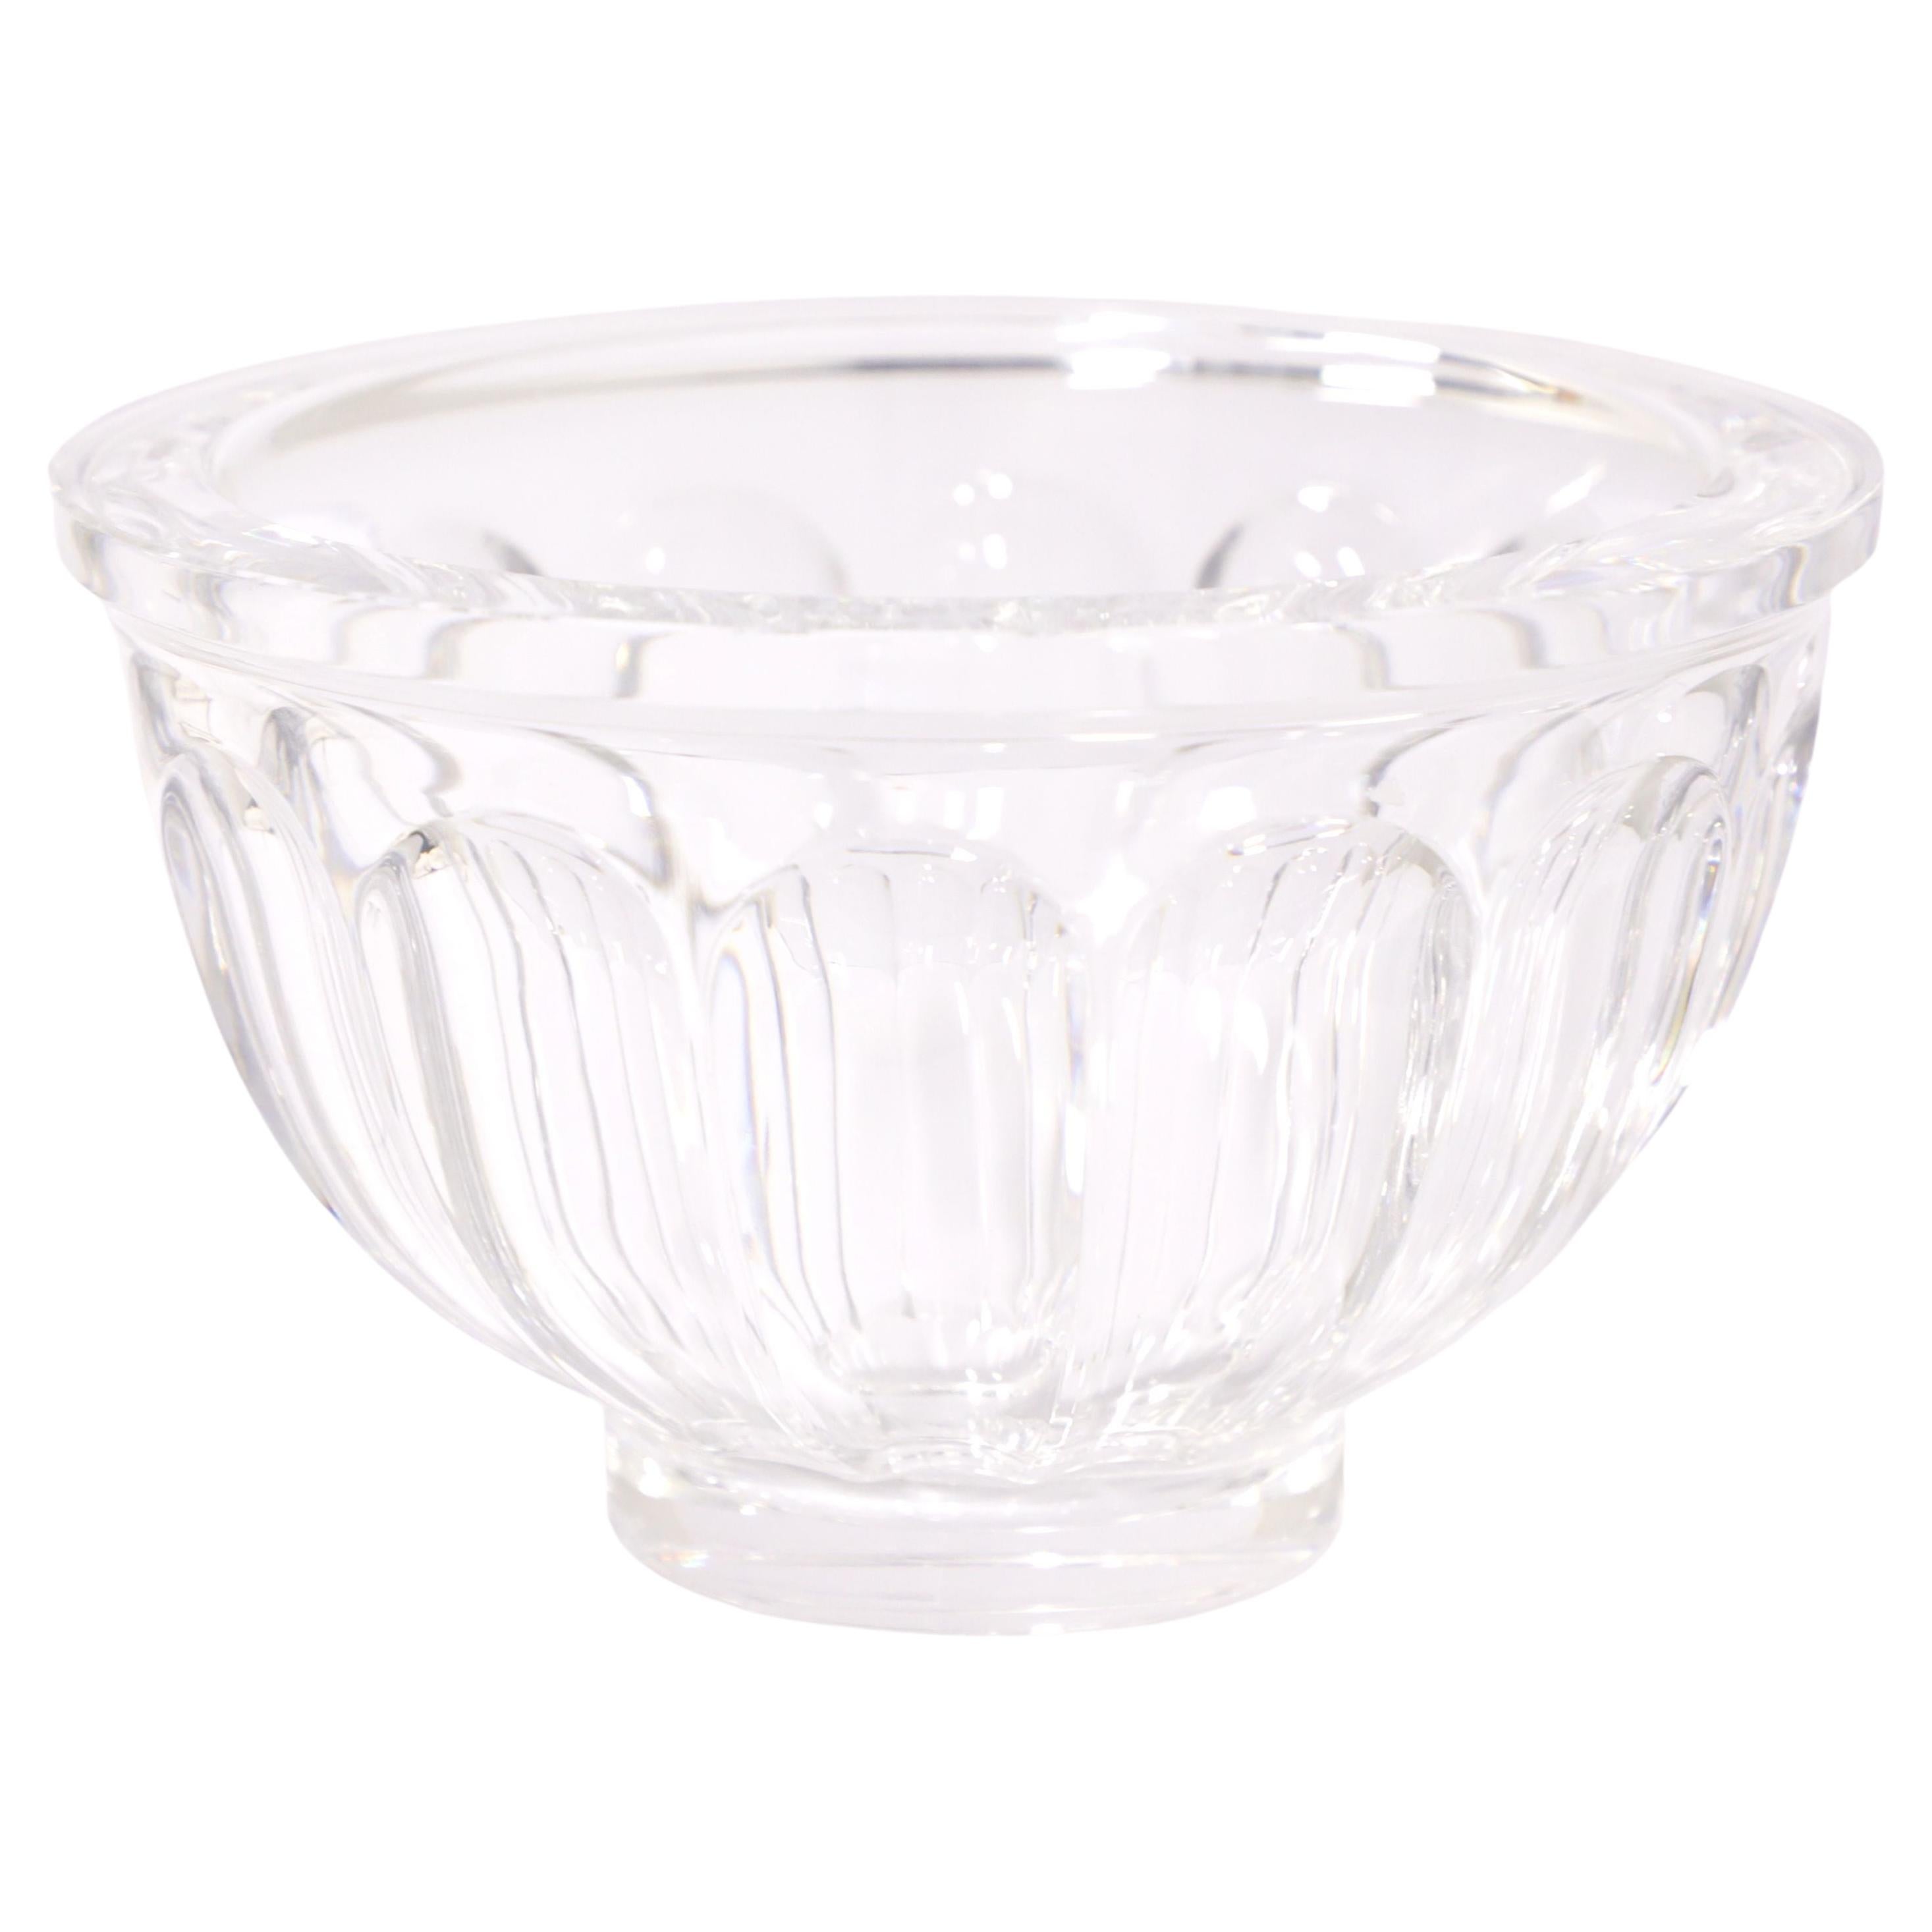 Late 20th Century Crystal Bowl - A For Sale